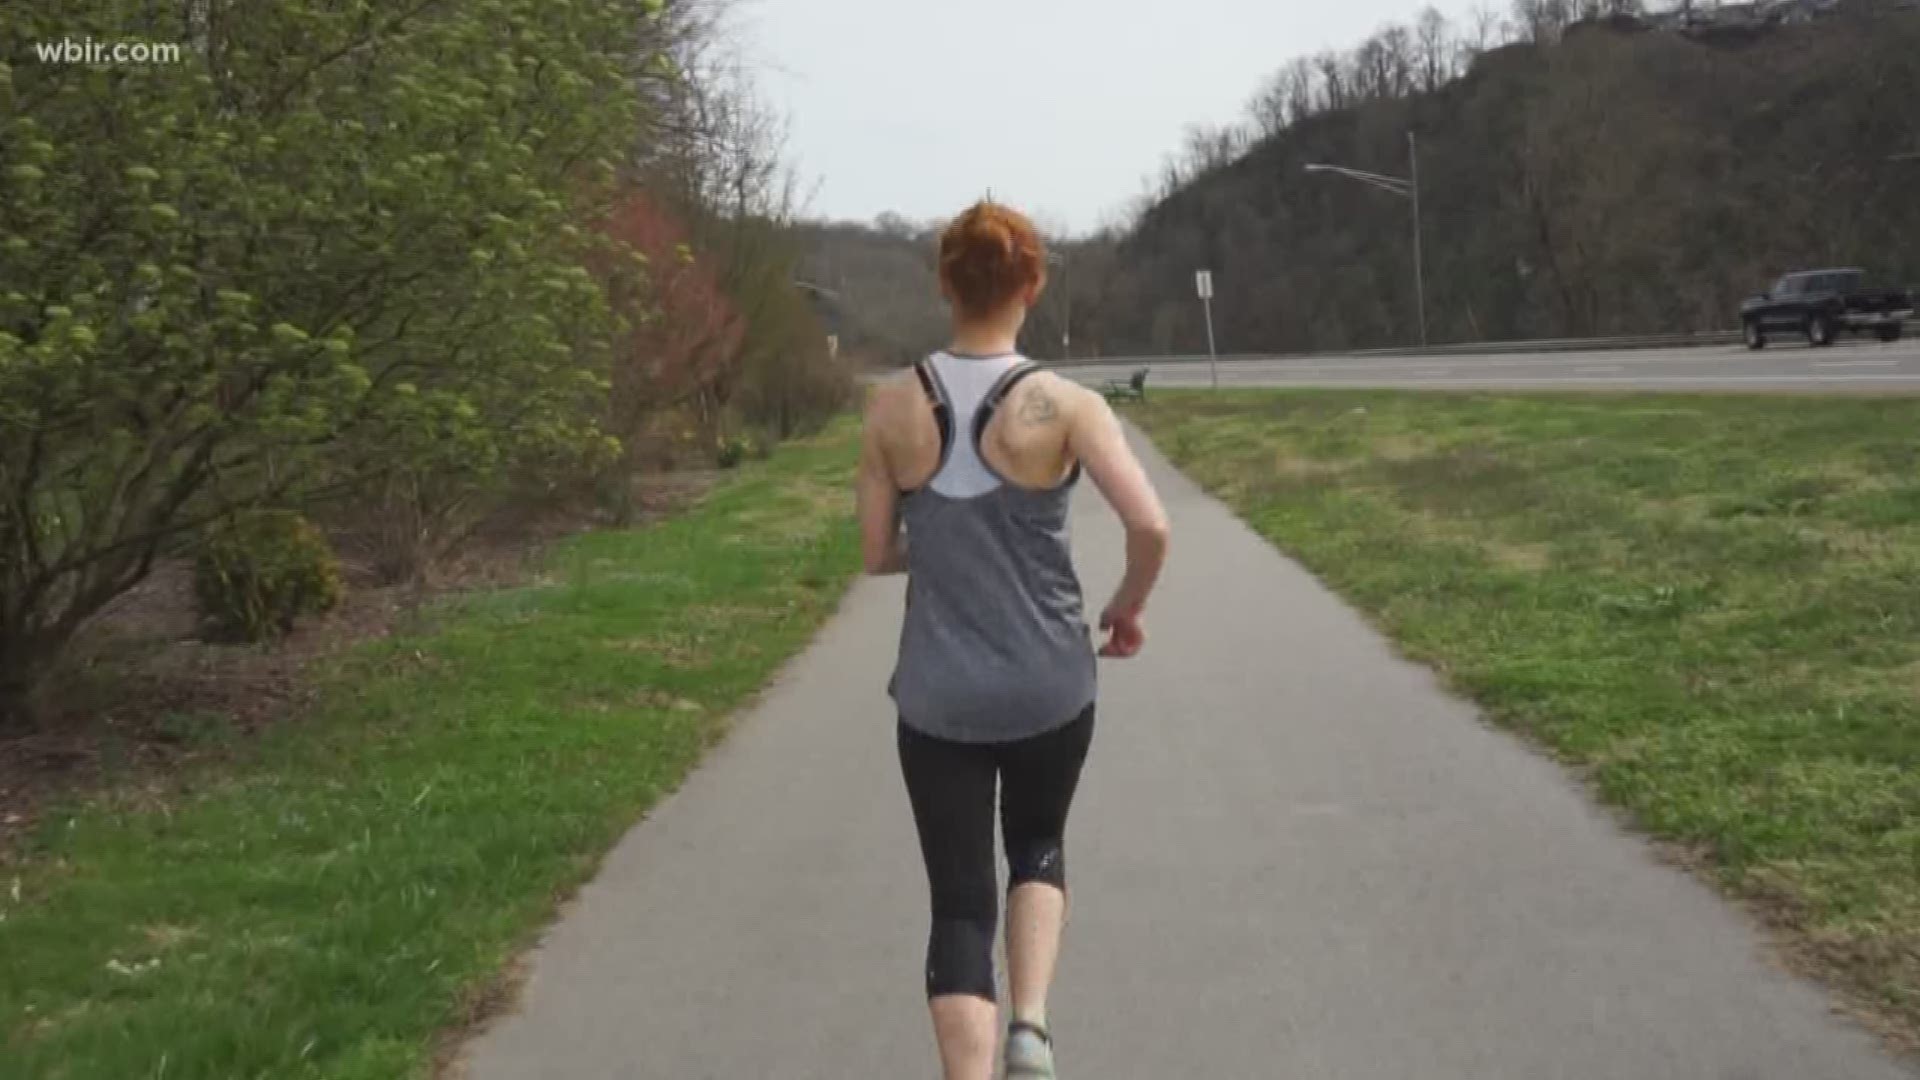 For one runner, this will be her second marathon since doctors diagnosed her with MS.